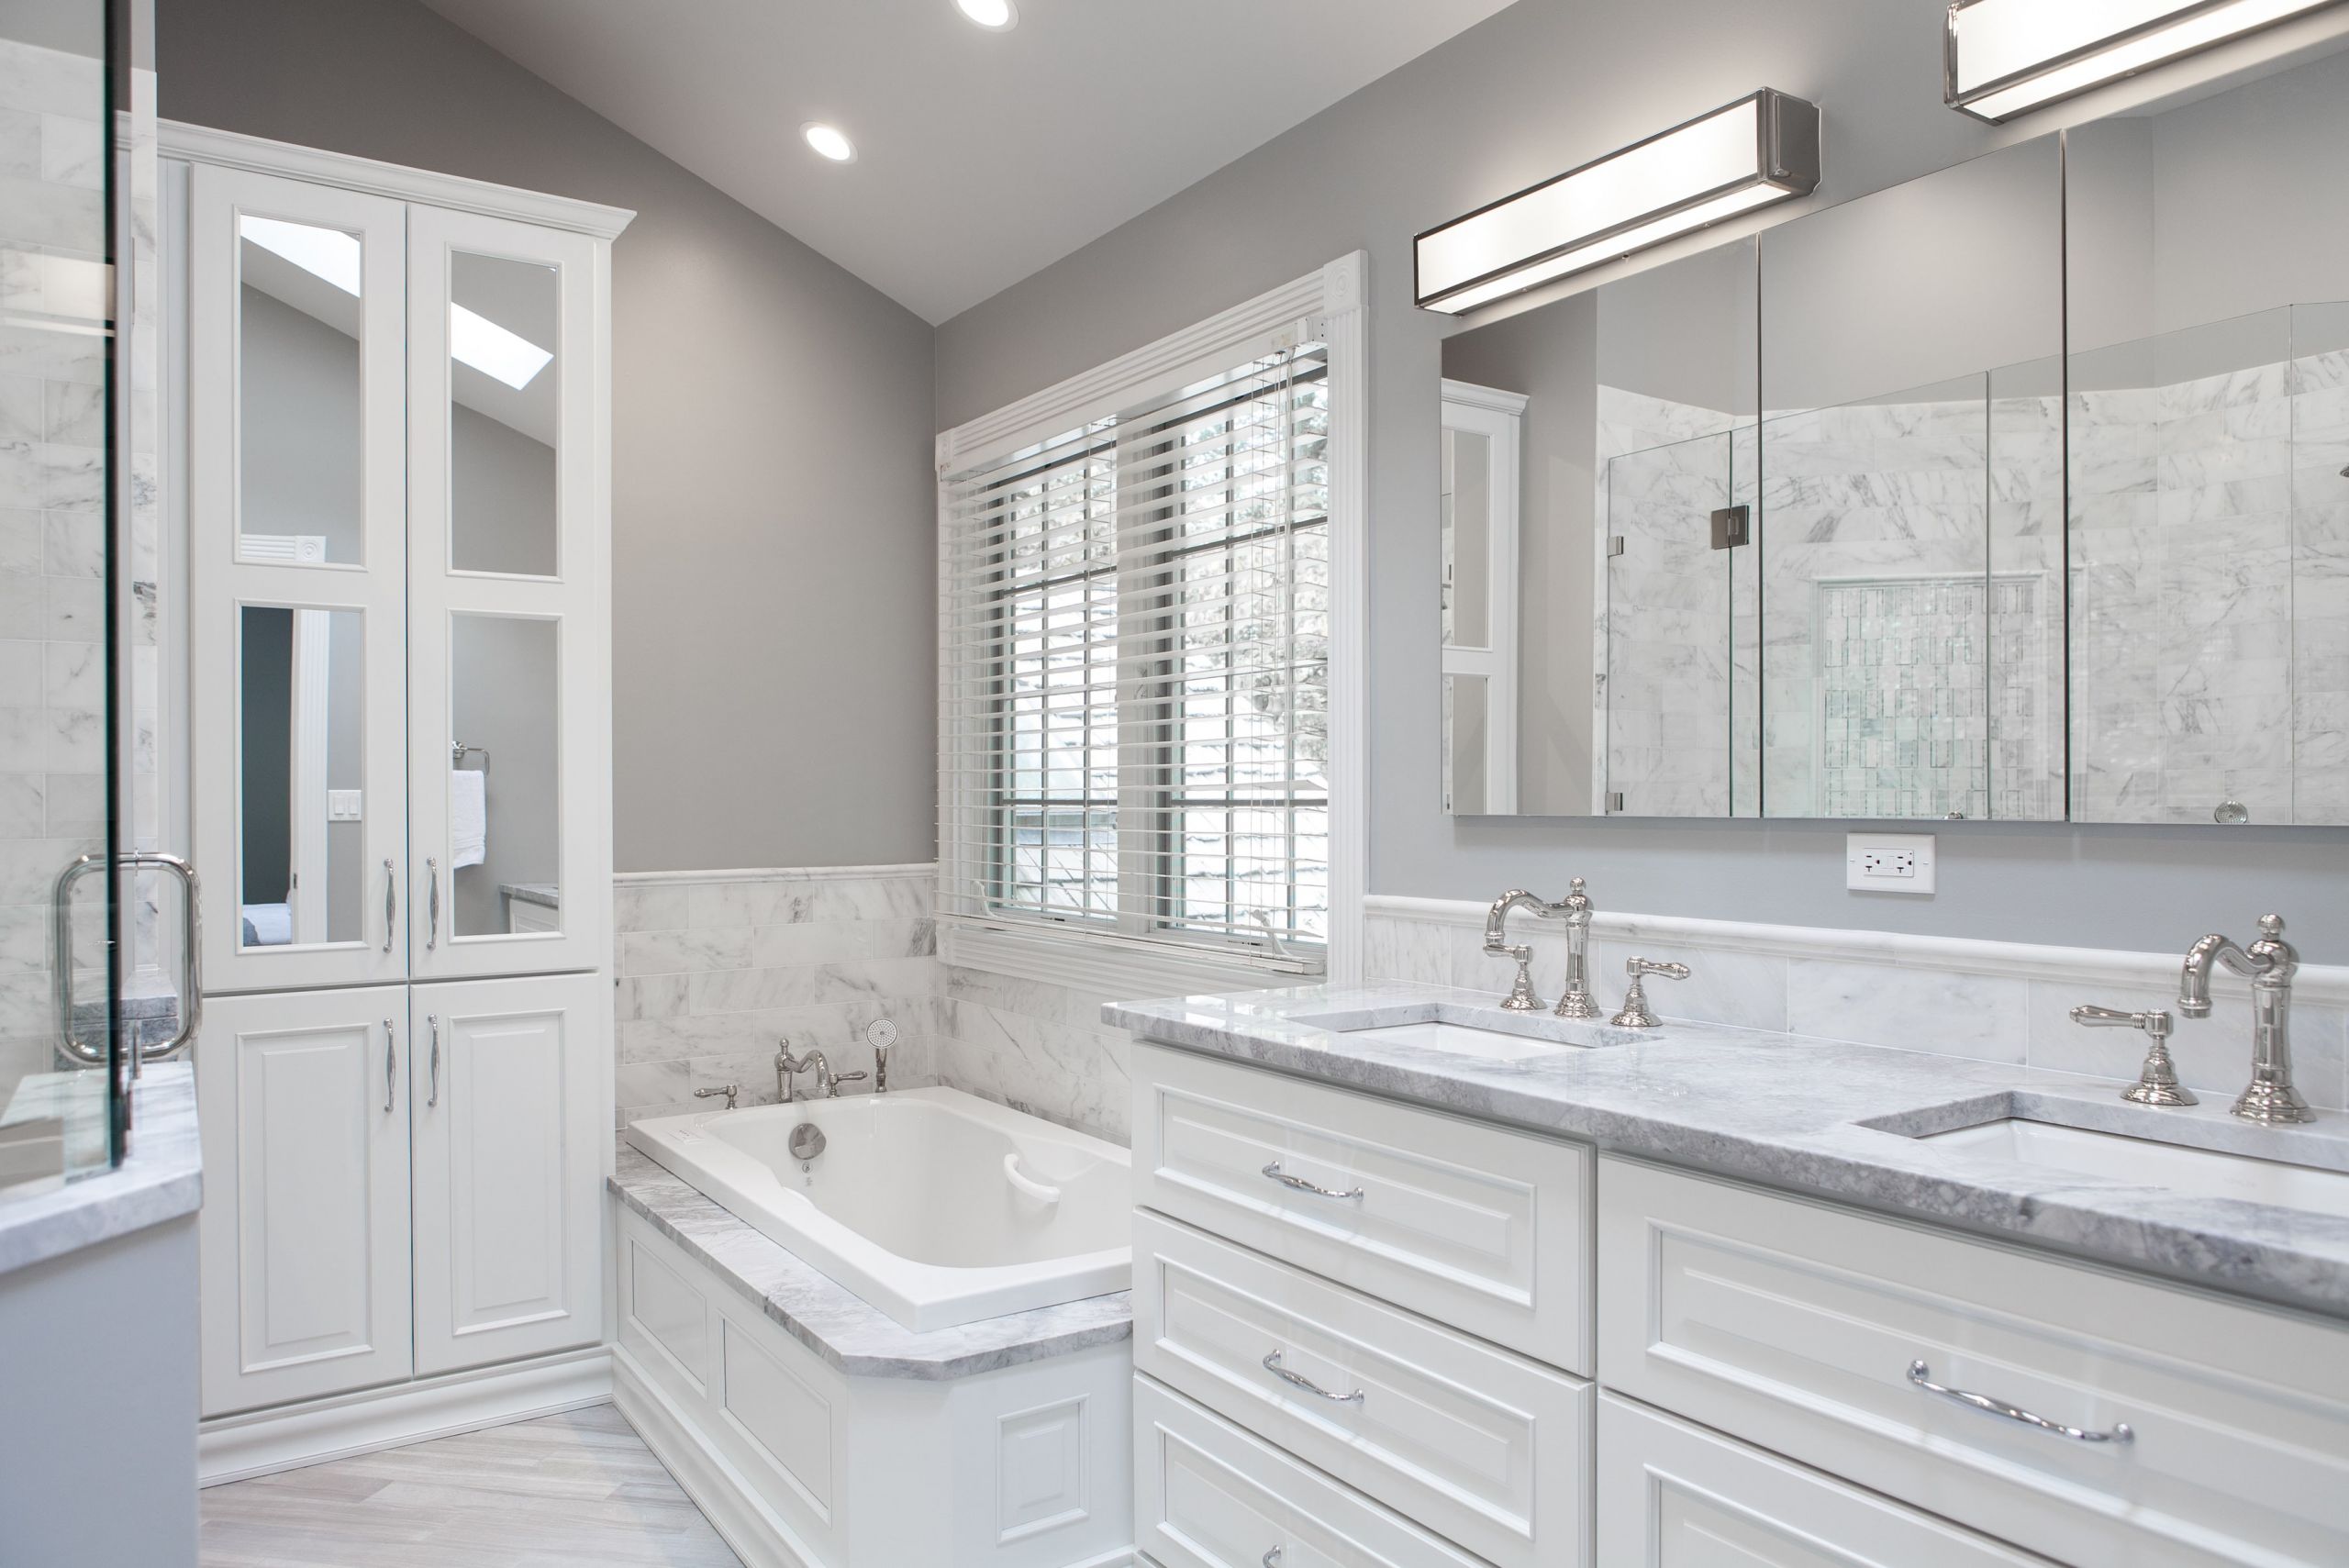 Cost To Remodel Bathroom
 How Much Does a Bathroom Remodel Cost in the Chicago Area